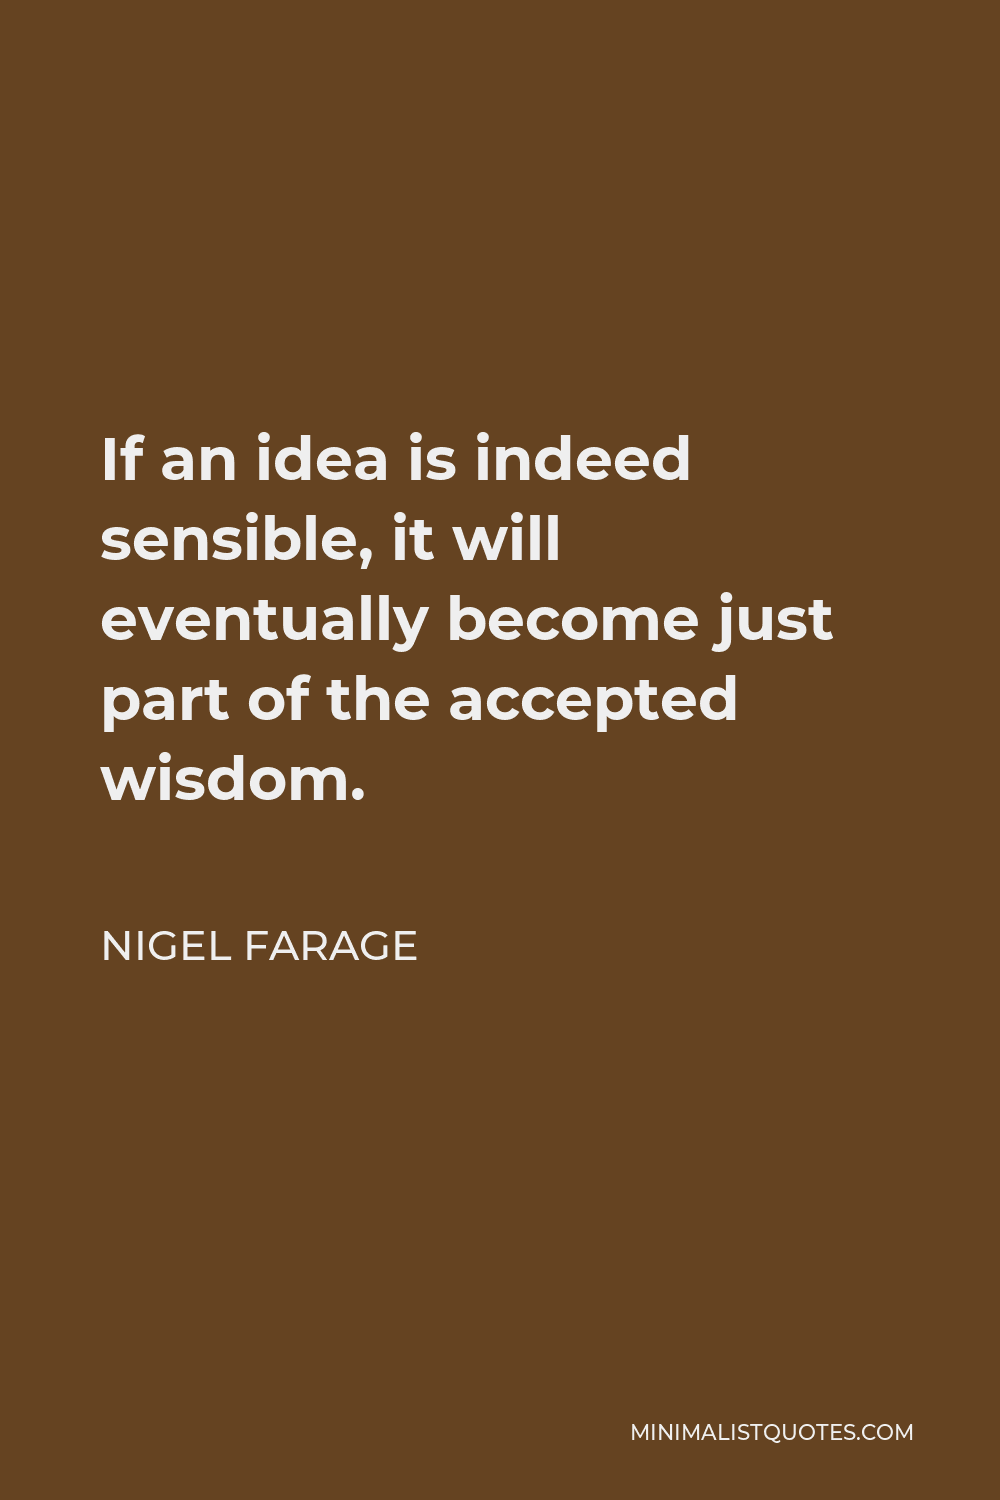 Nigel Farage Quote - If an idea is indeed sensible, it will eventually become just part of the accepted wisdom.